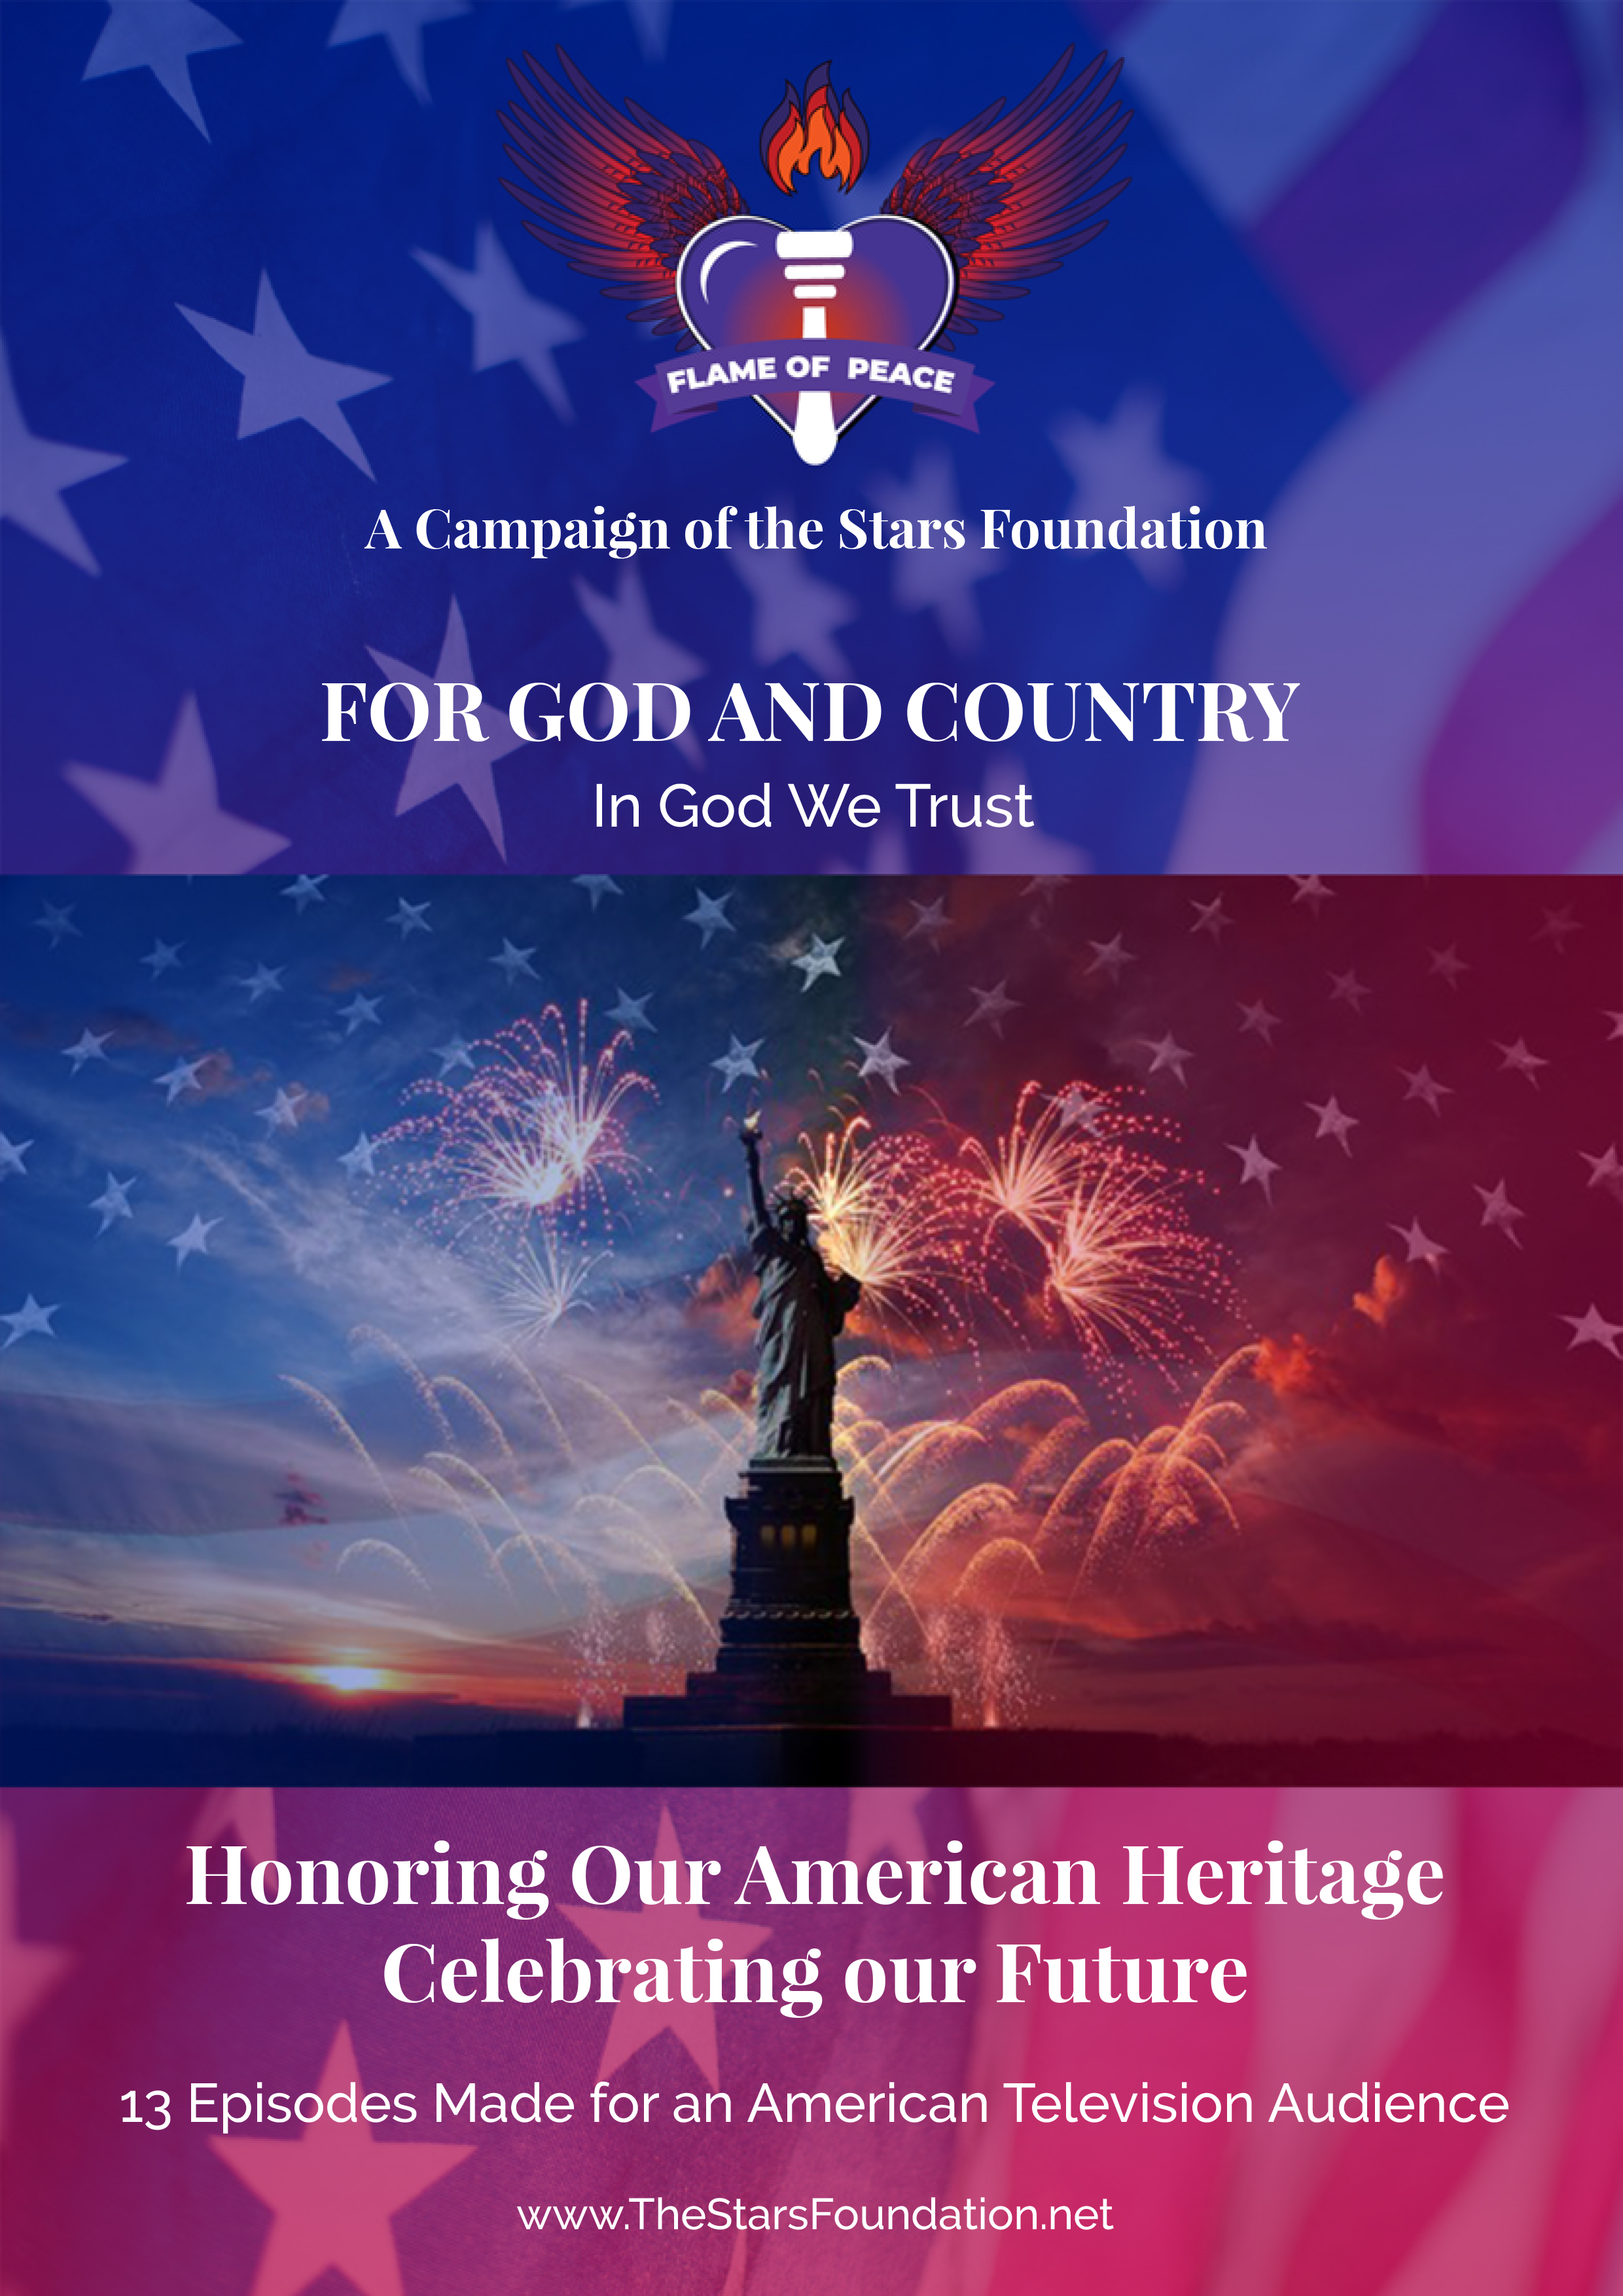 For god and country pdf